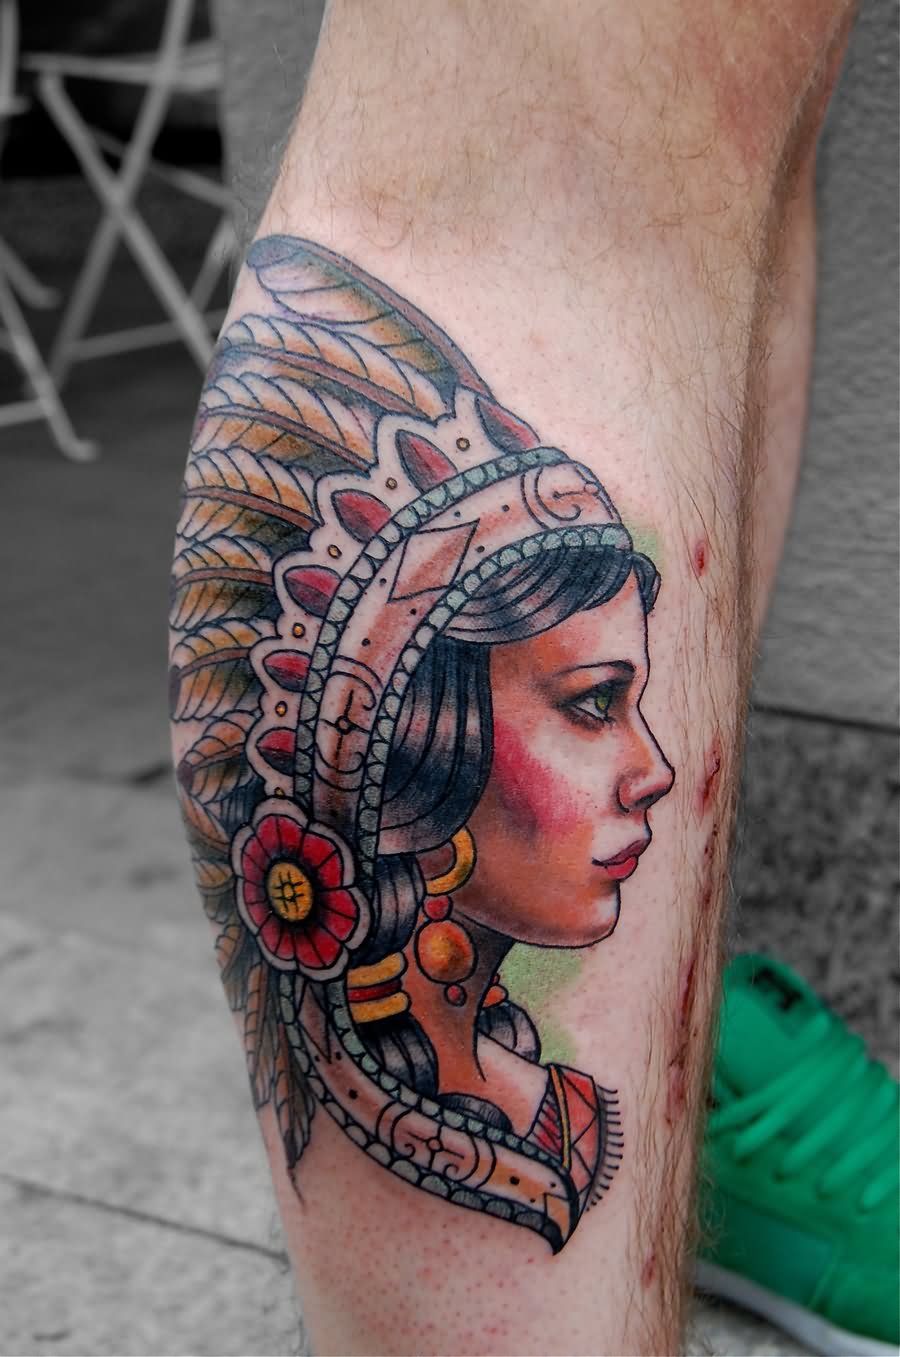 Traditional Indian Chief Female Tattoo Design For Leg Calf by Tattooneos